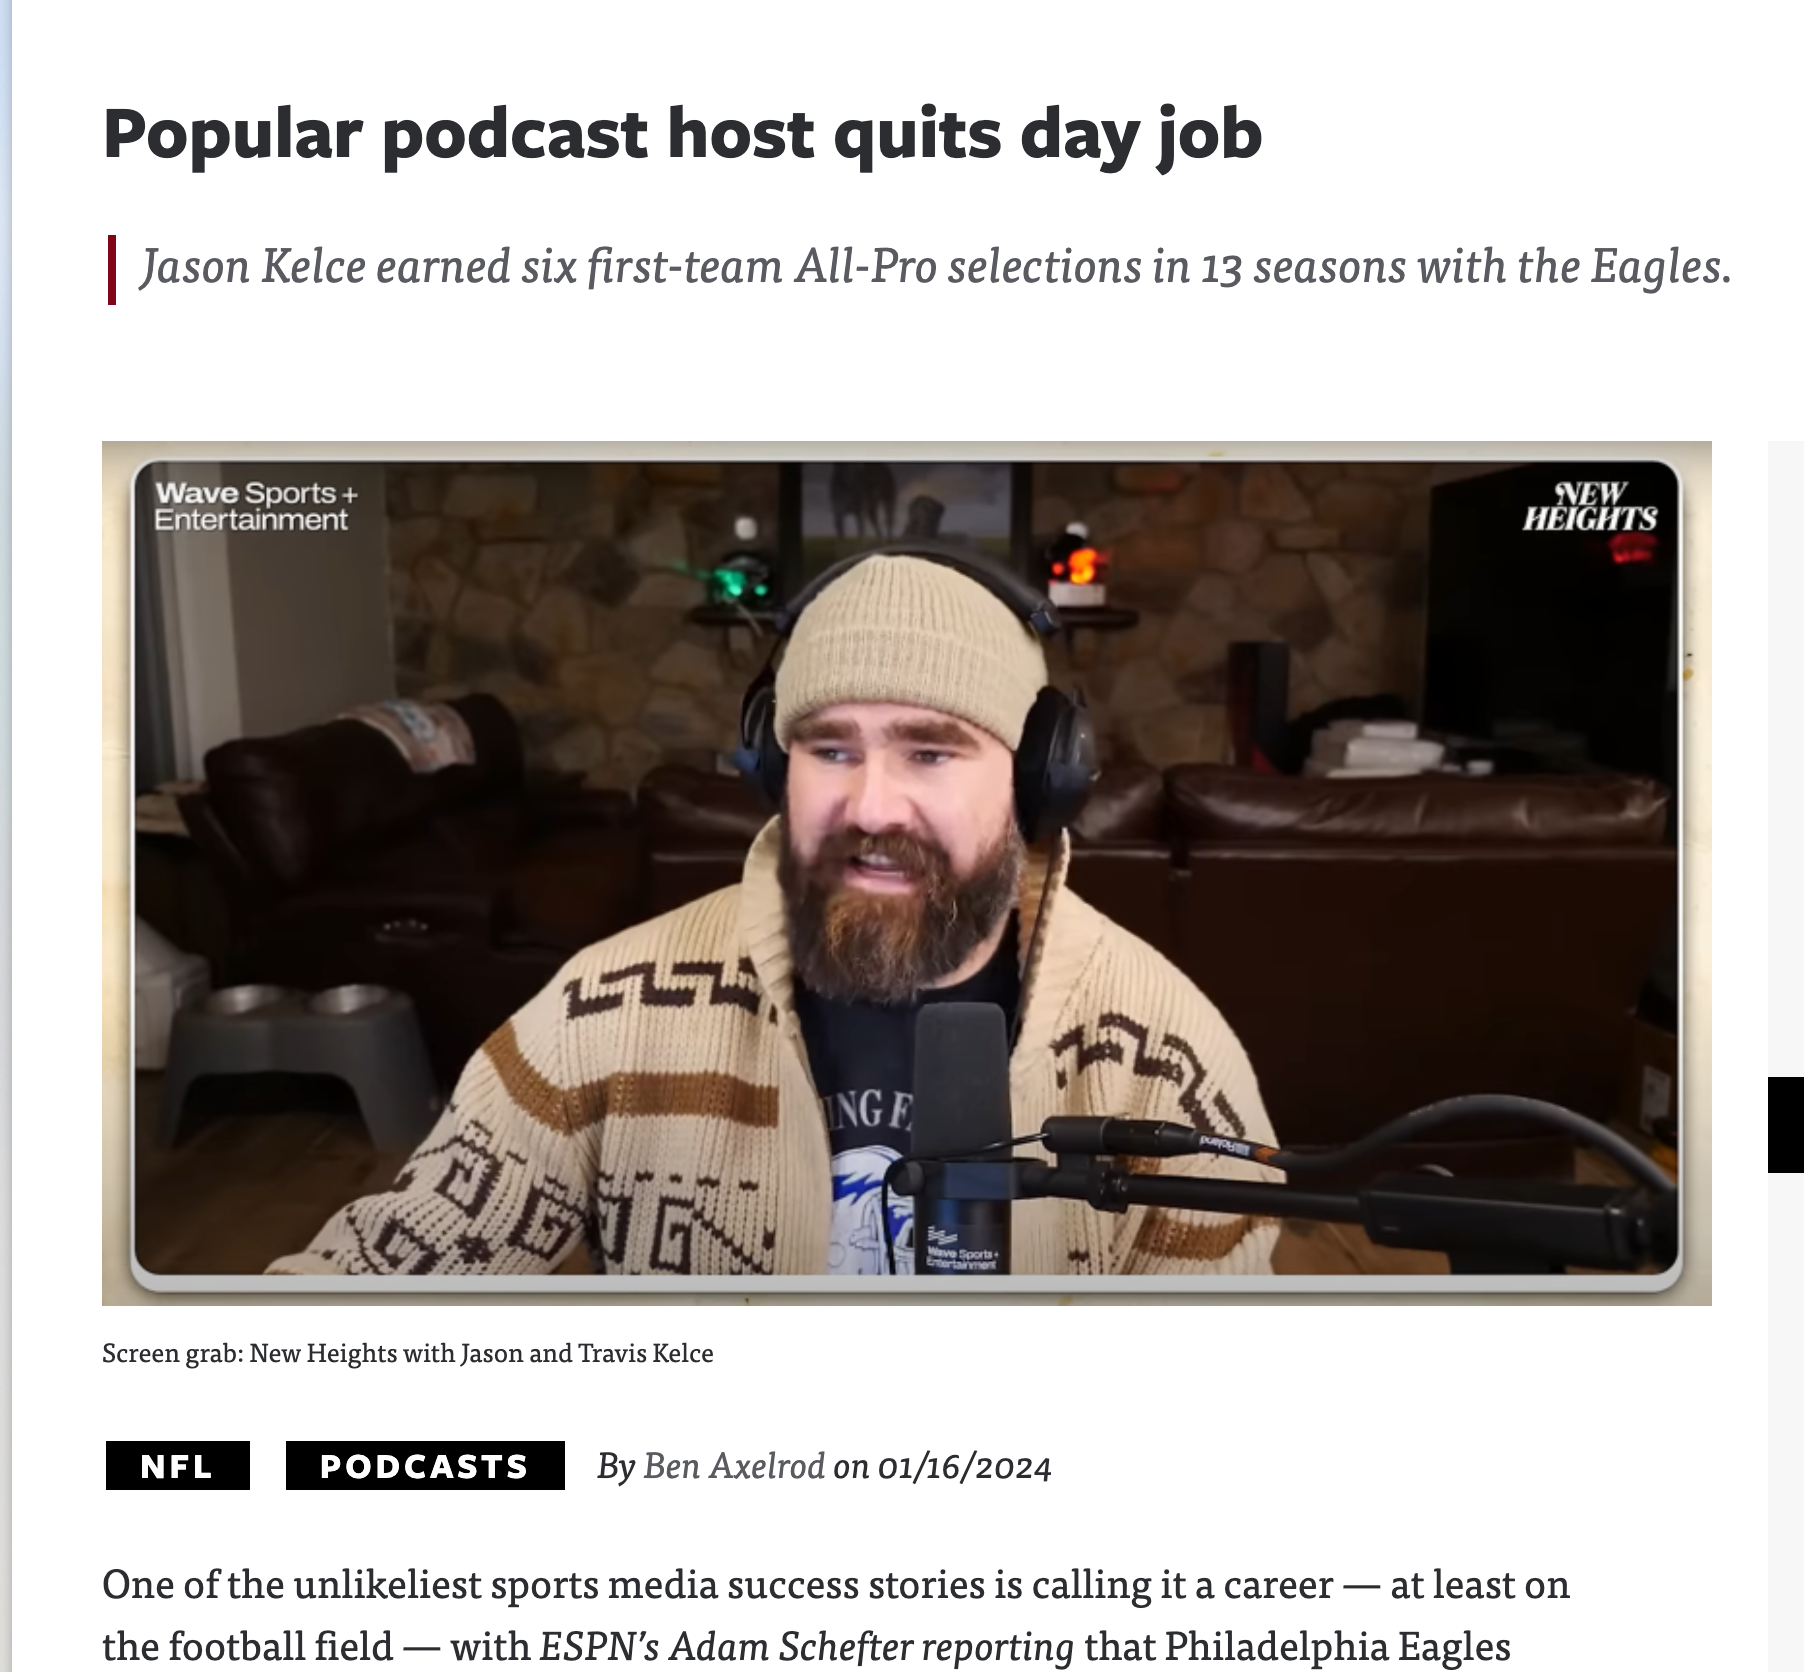 Headline from a news site reading “Popular podcast host quits day job - Jason Kelce earned six first-team All-Pro selections in 13 seasons with the Eagles.” talking about Jason Kelce retiring from football but getting to continue the podcast with his brother called New Heights.